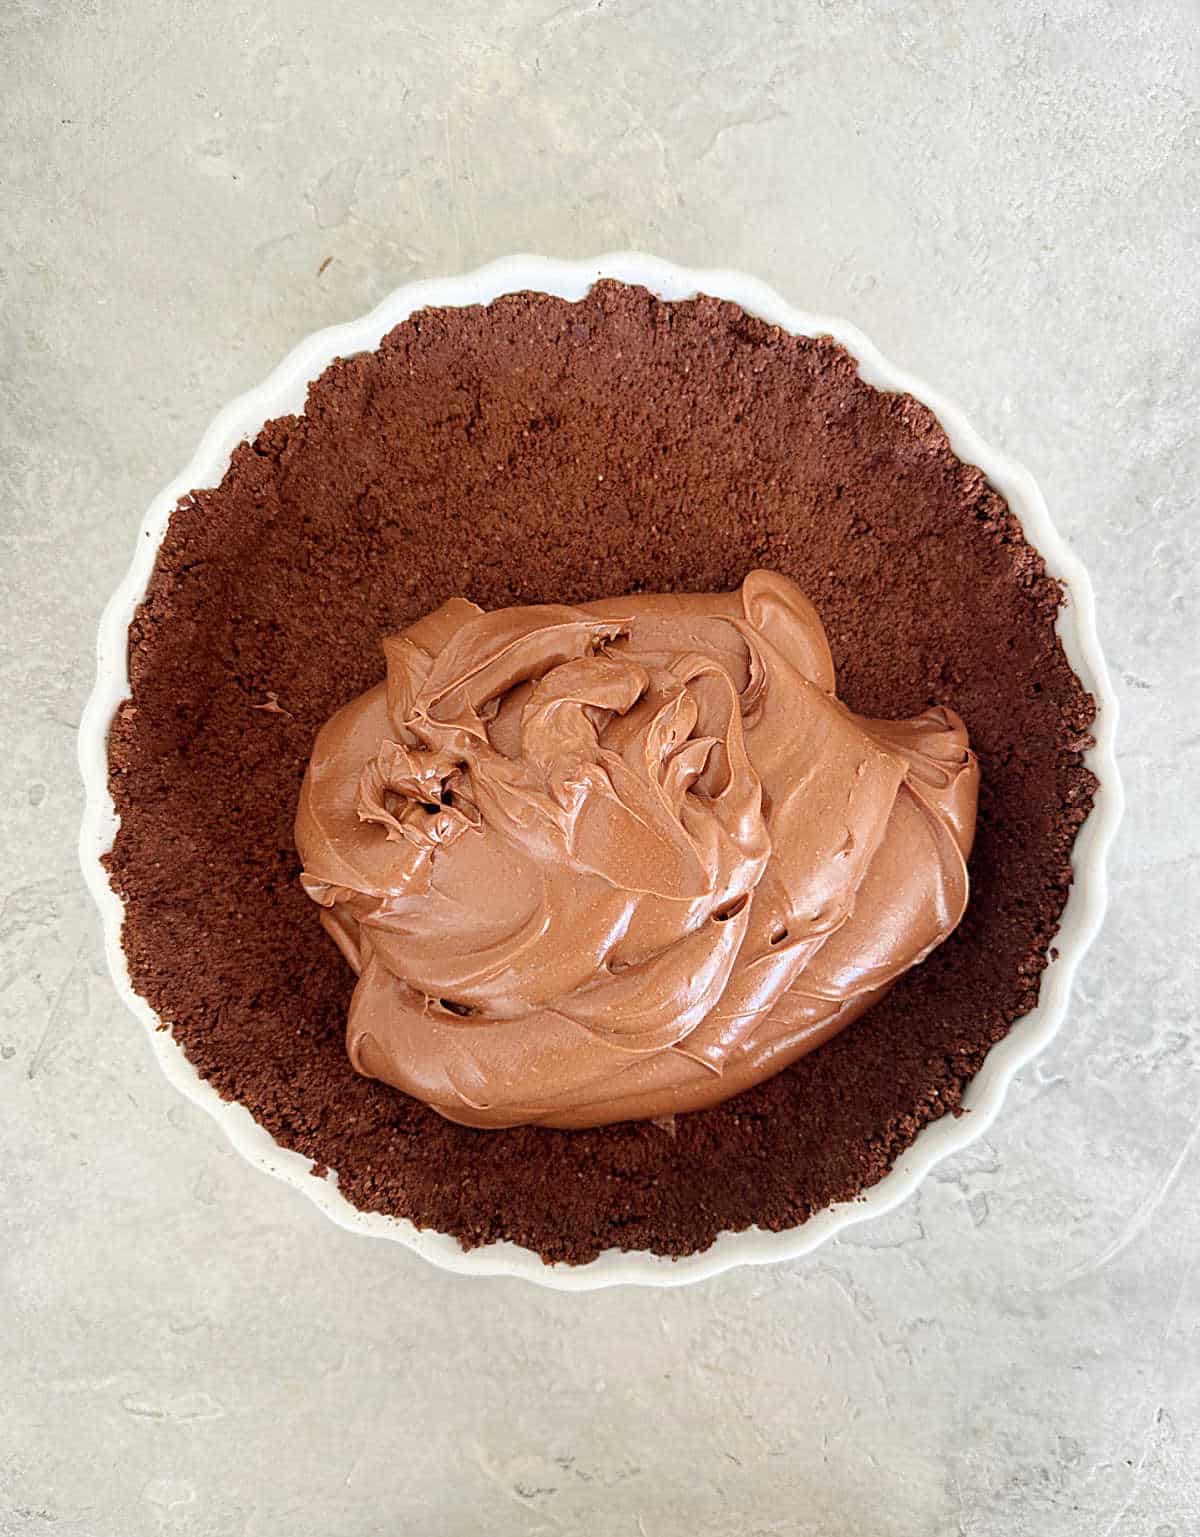 Chocolate filling in a chocolate crust on a white dish. Light grey surface.